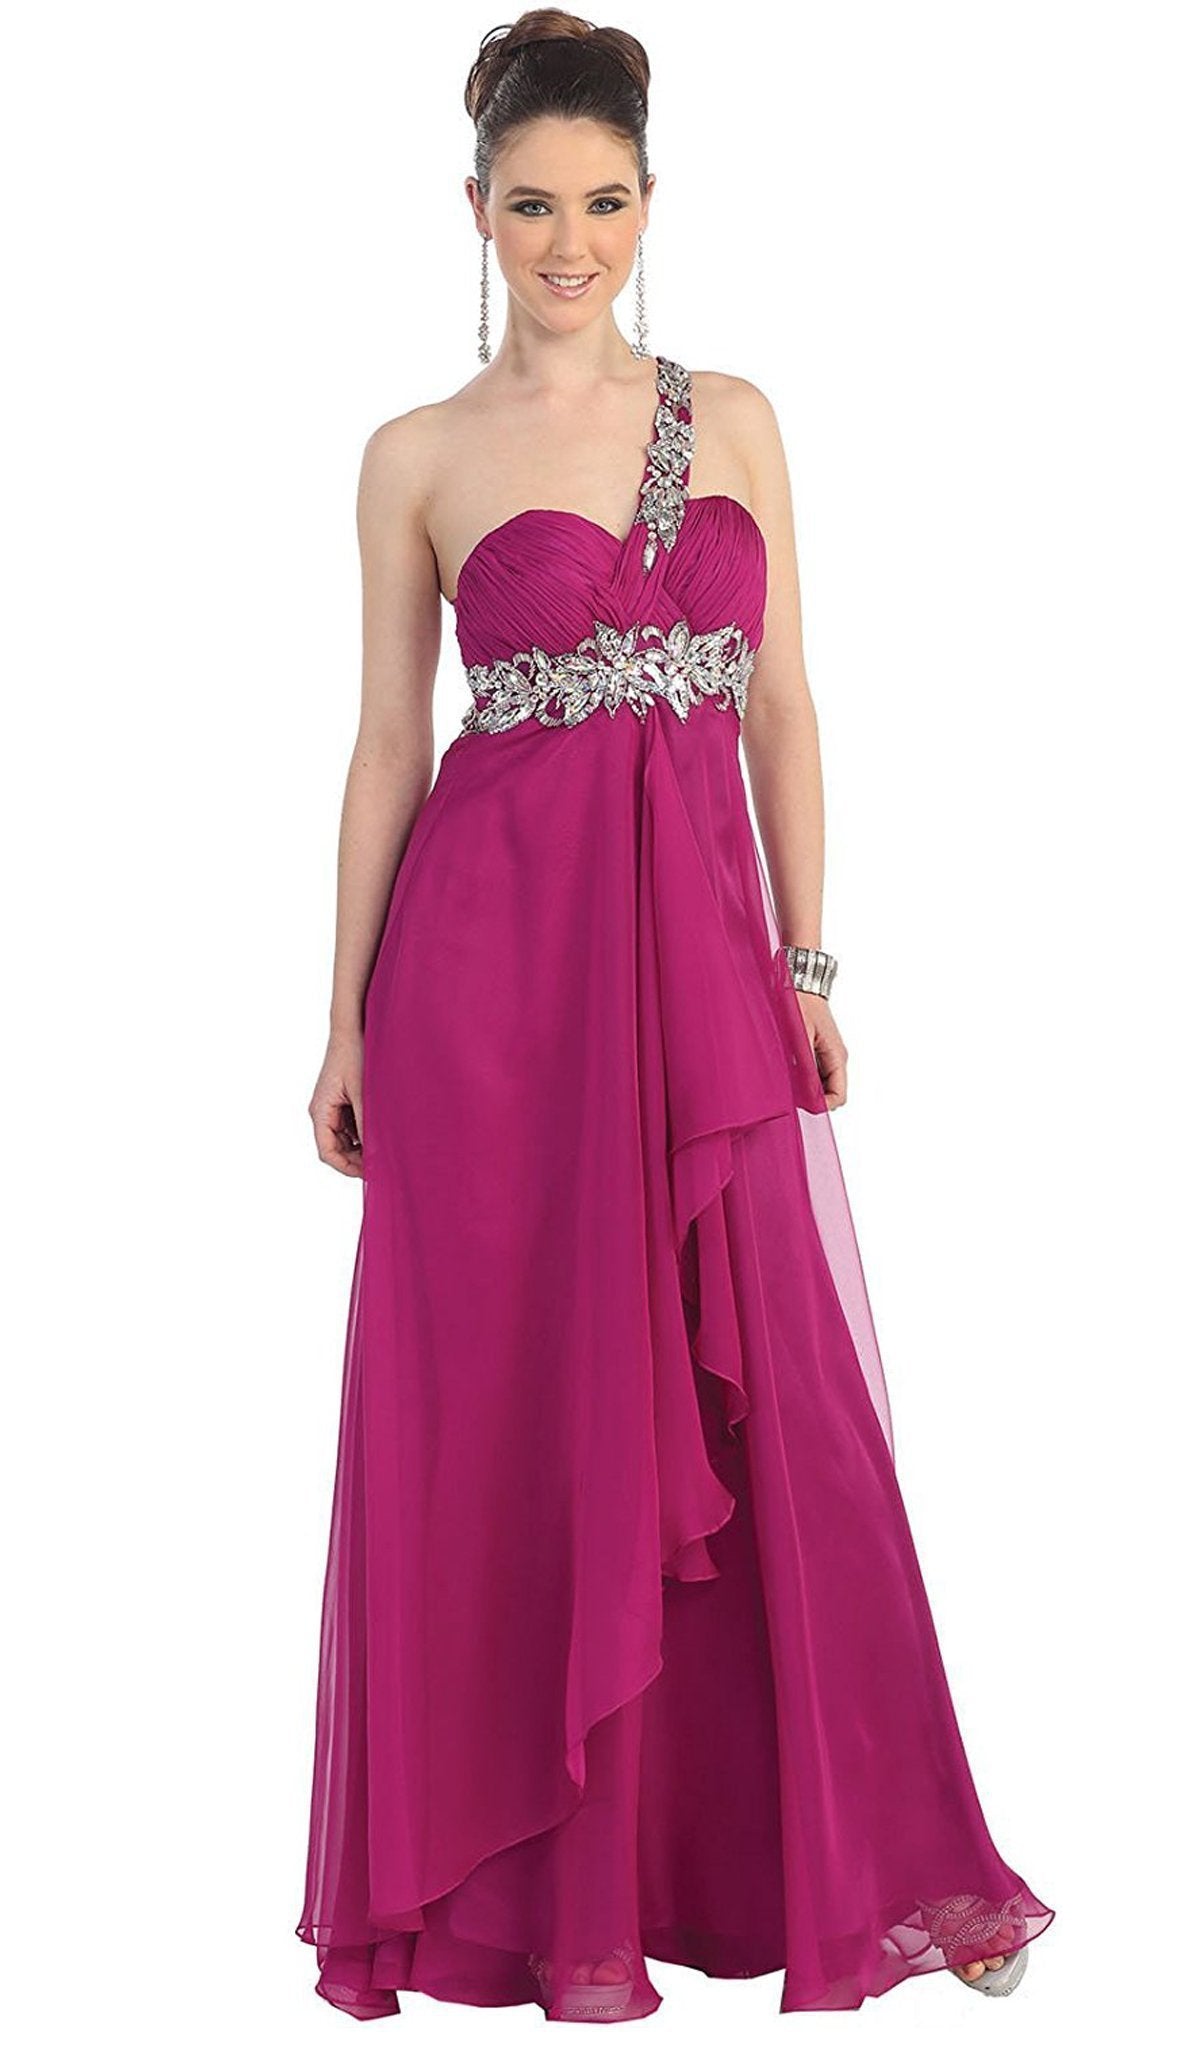 May Queen - MQ1028 Ornate Strap Ruched Sweetheart A-line Prom Dress In Purple